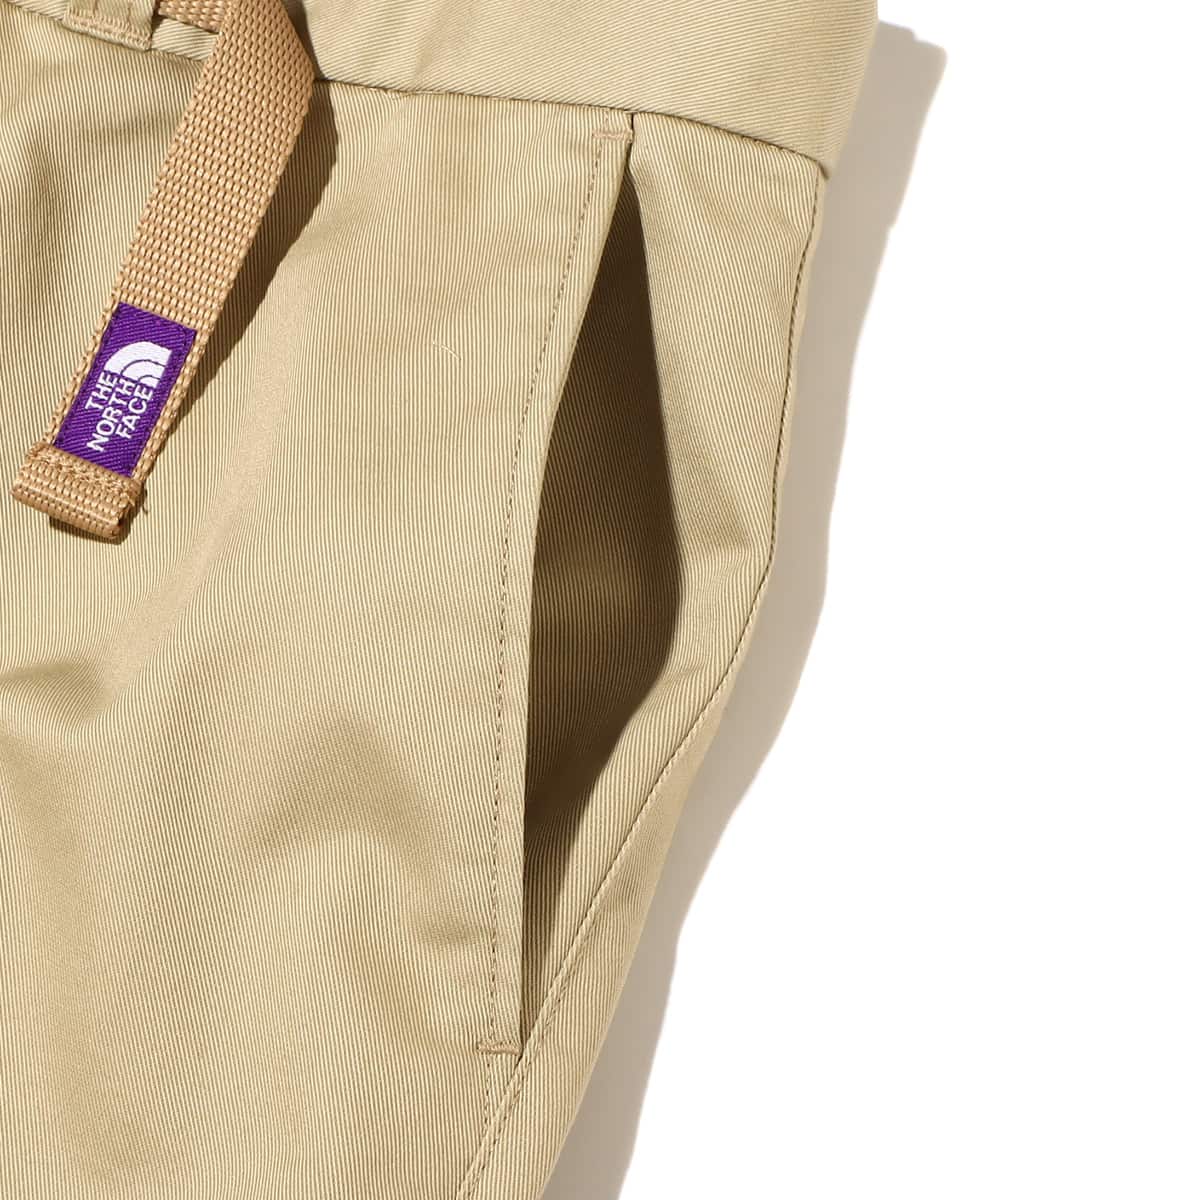 THE NORTH FACE PURPLE LABEL Stretch Twill Tapered Pants Beige 23SS-I